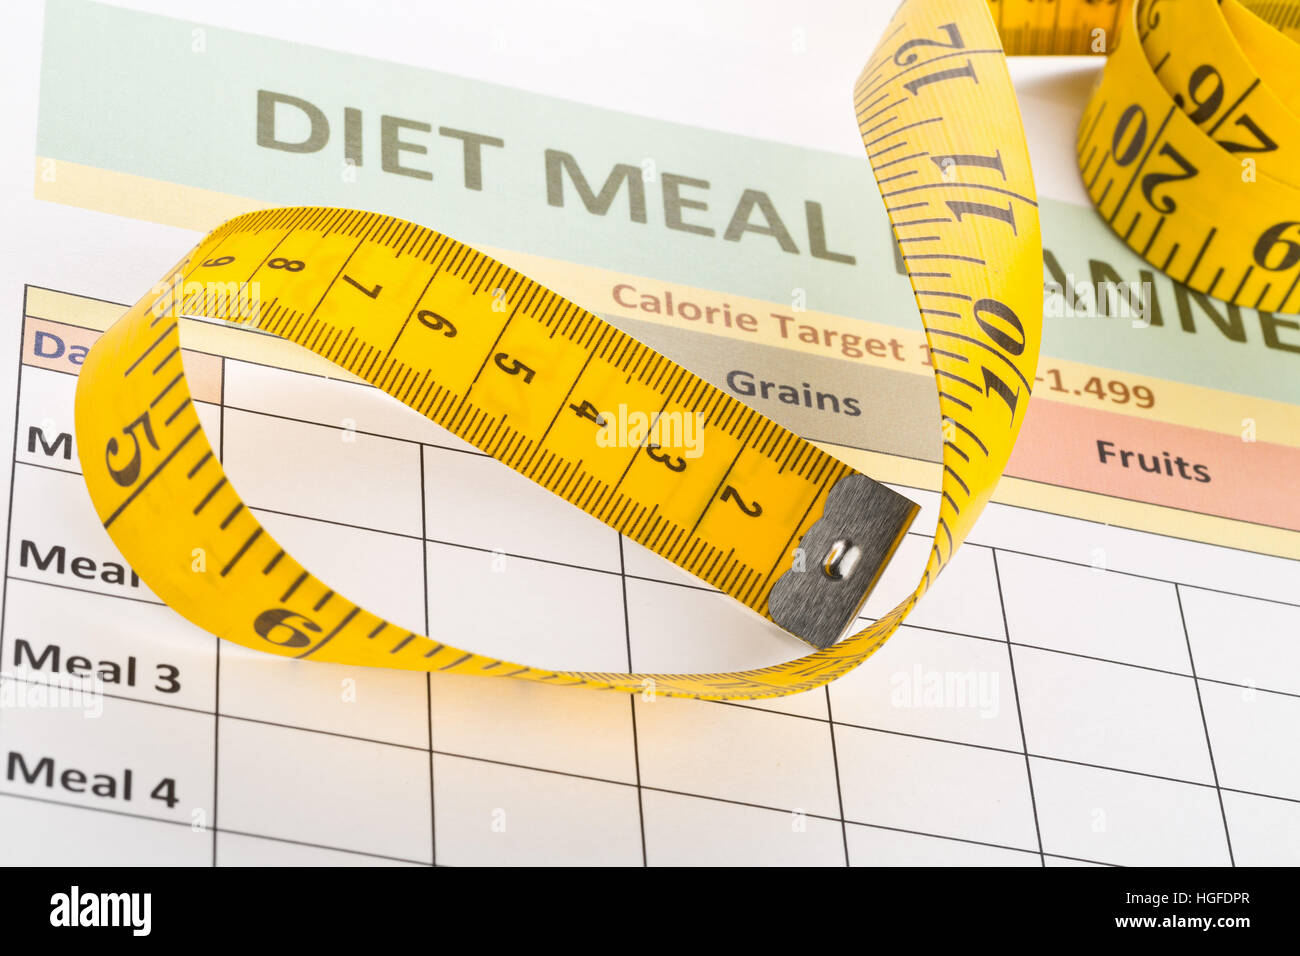 Measurement tape on diet meal planner sheet - dieting or weight loss concept Stock Photo